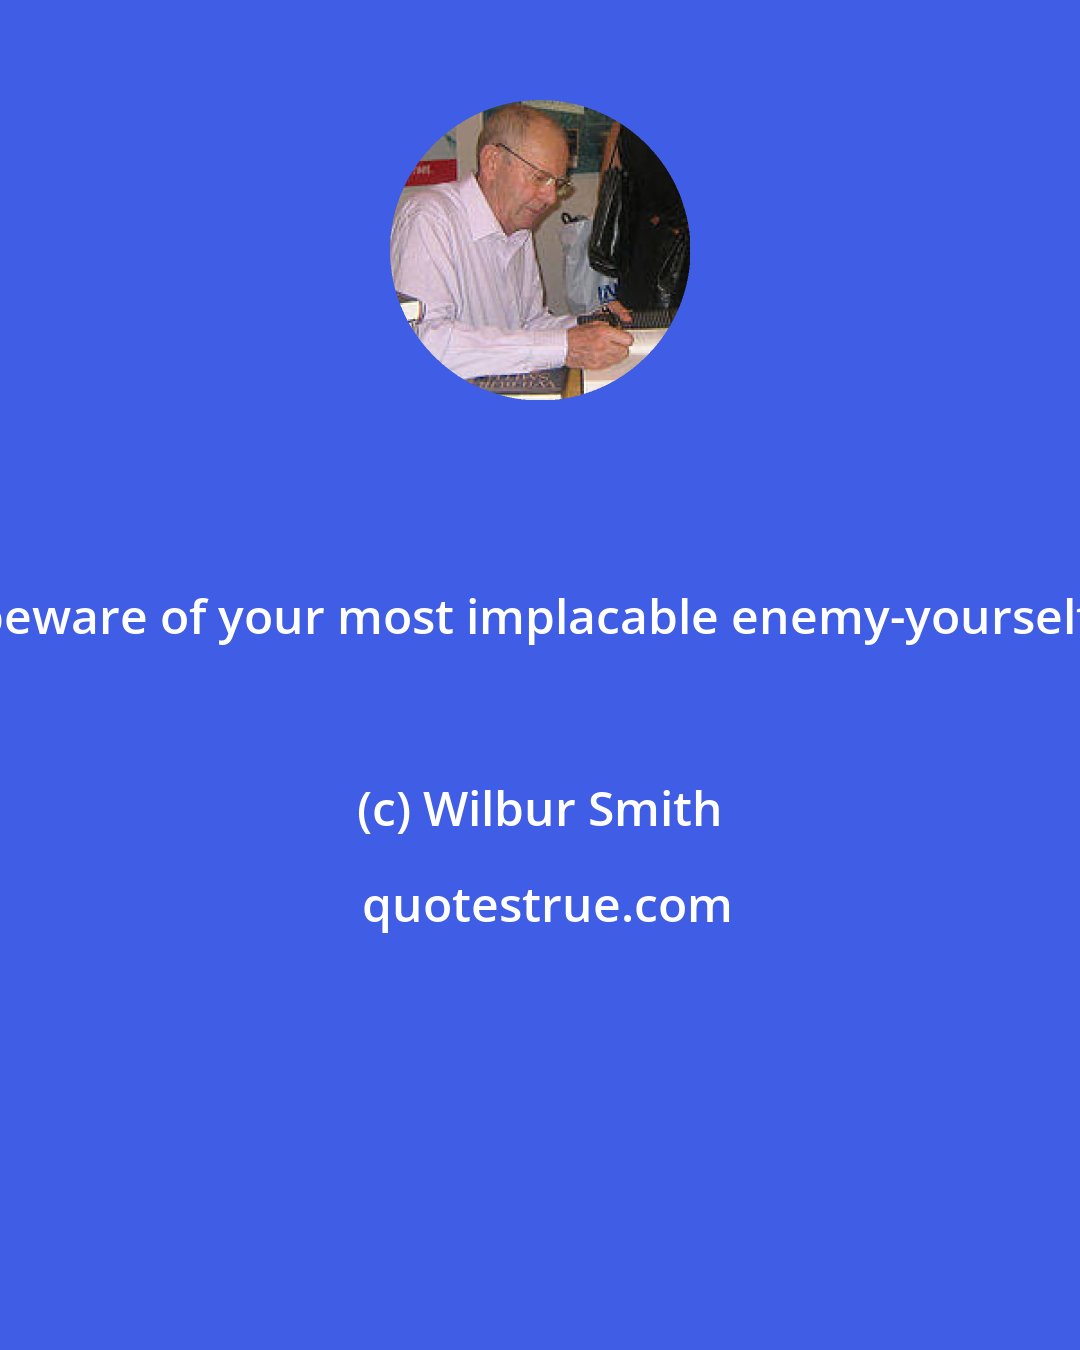 Wilbur Smith: beware of your most implacable enemy-yourself.